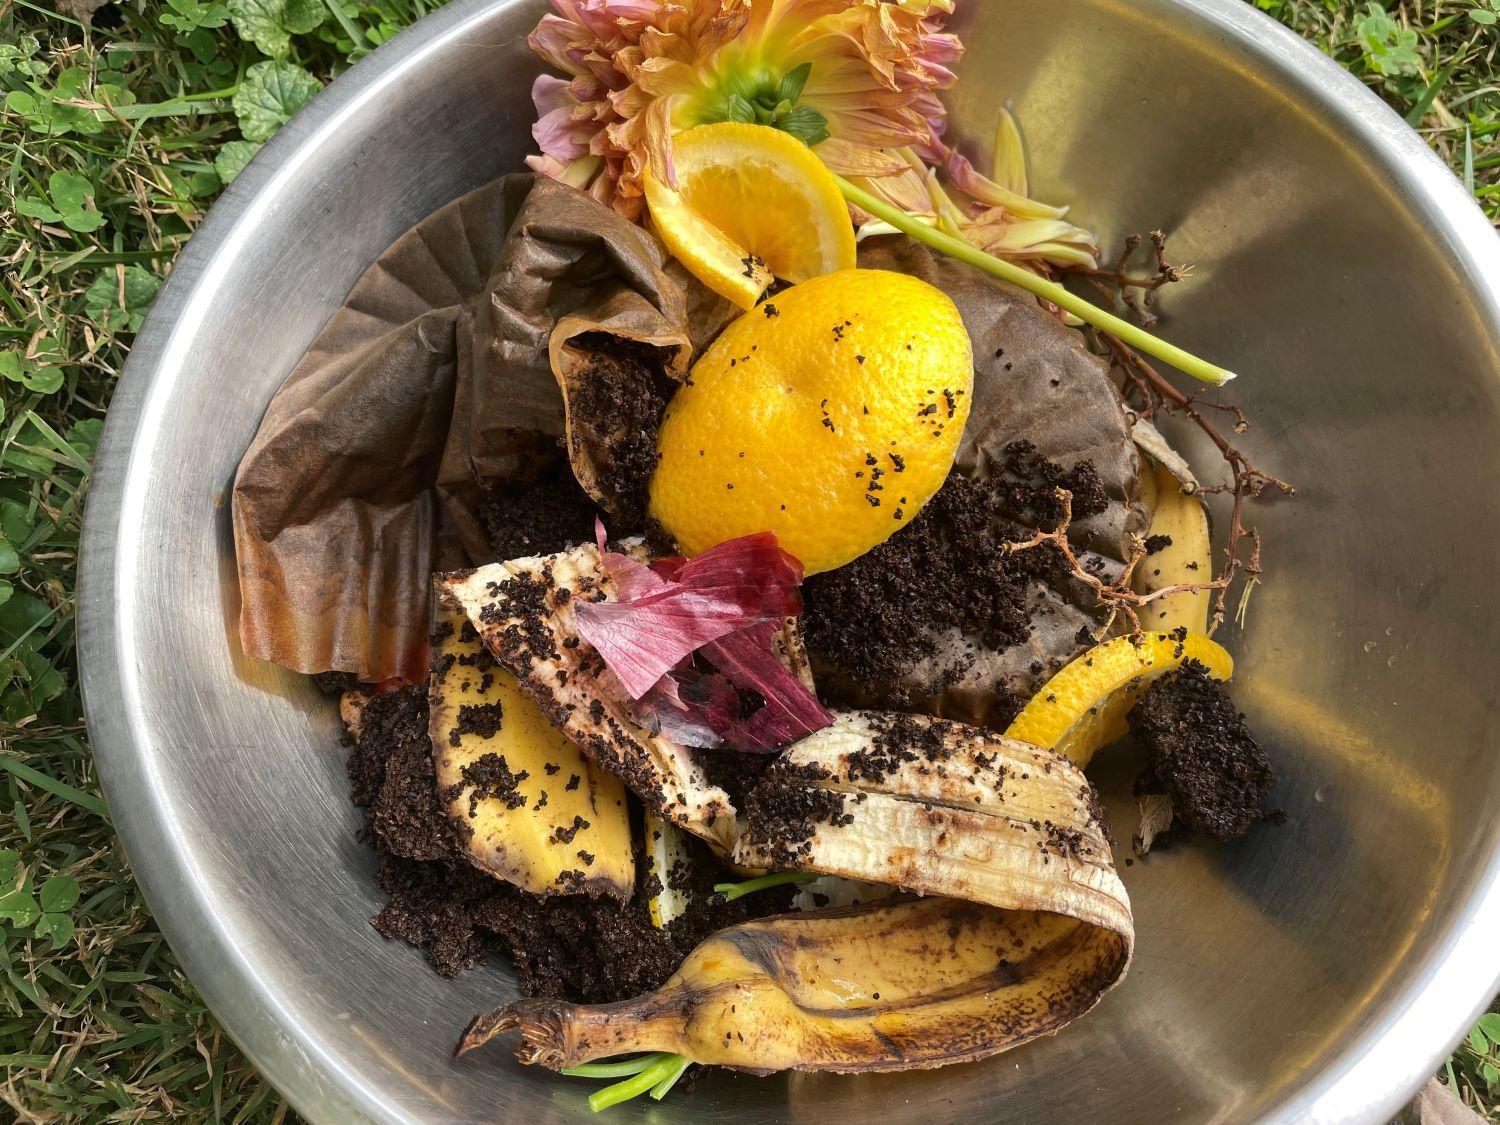 kitchen scraps in a bowl and ready for the compost bin